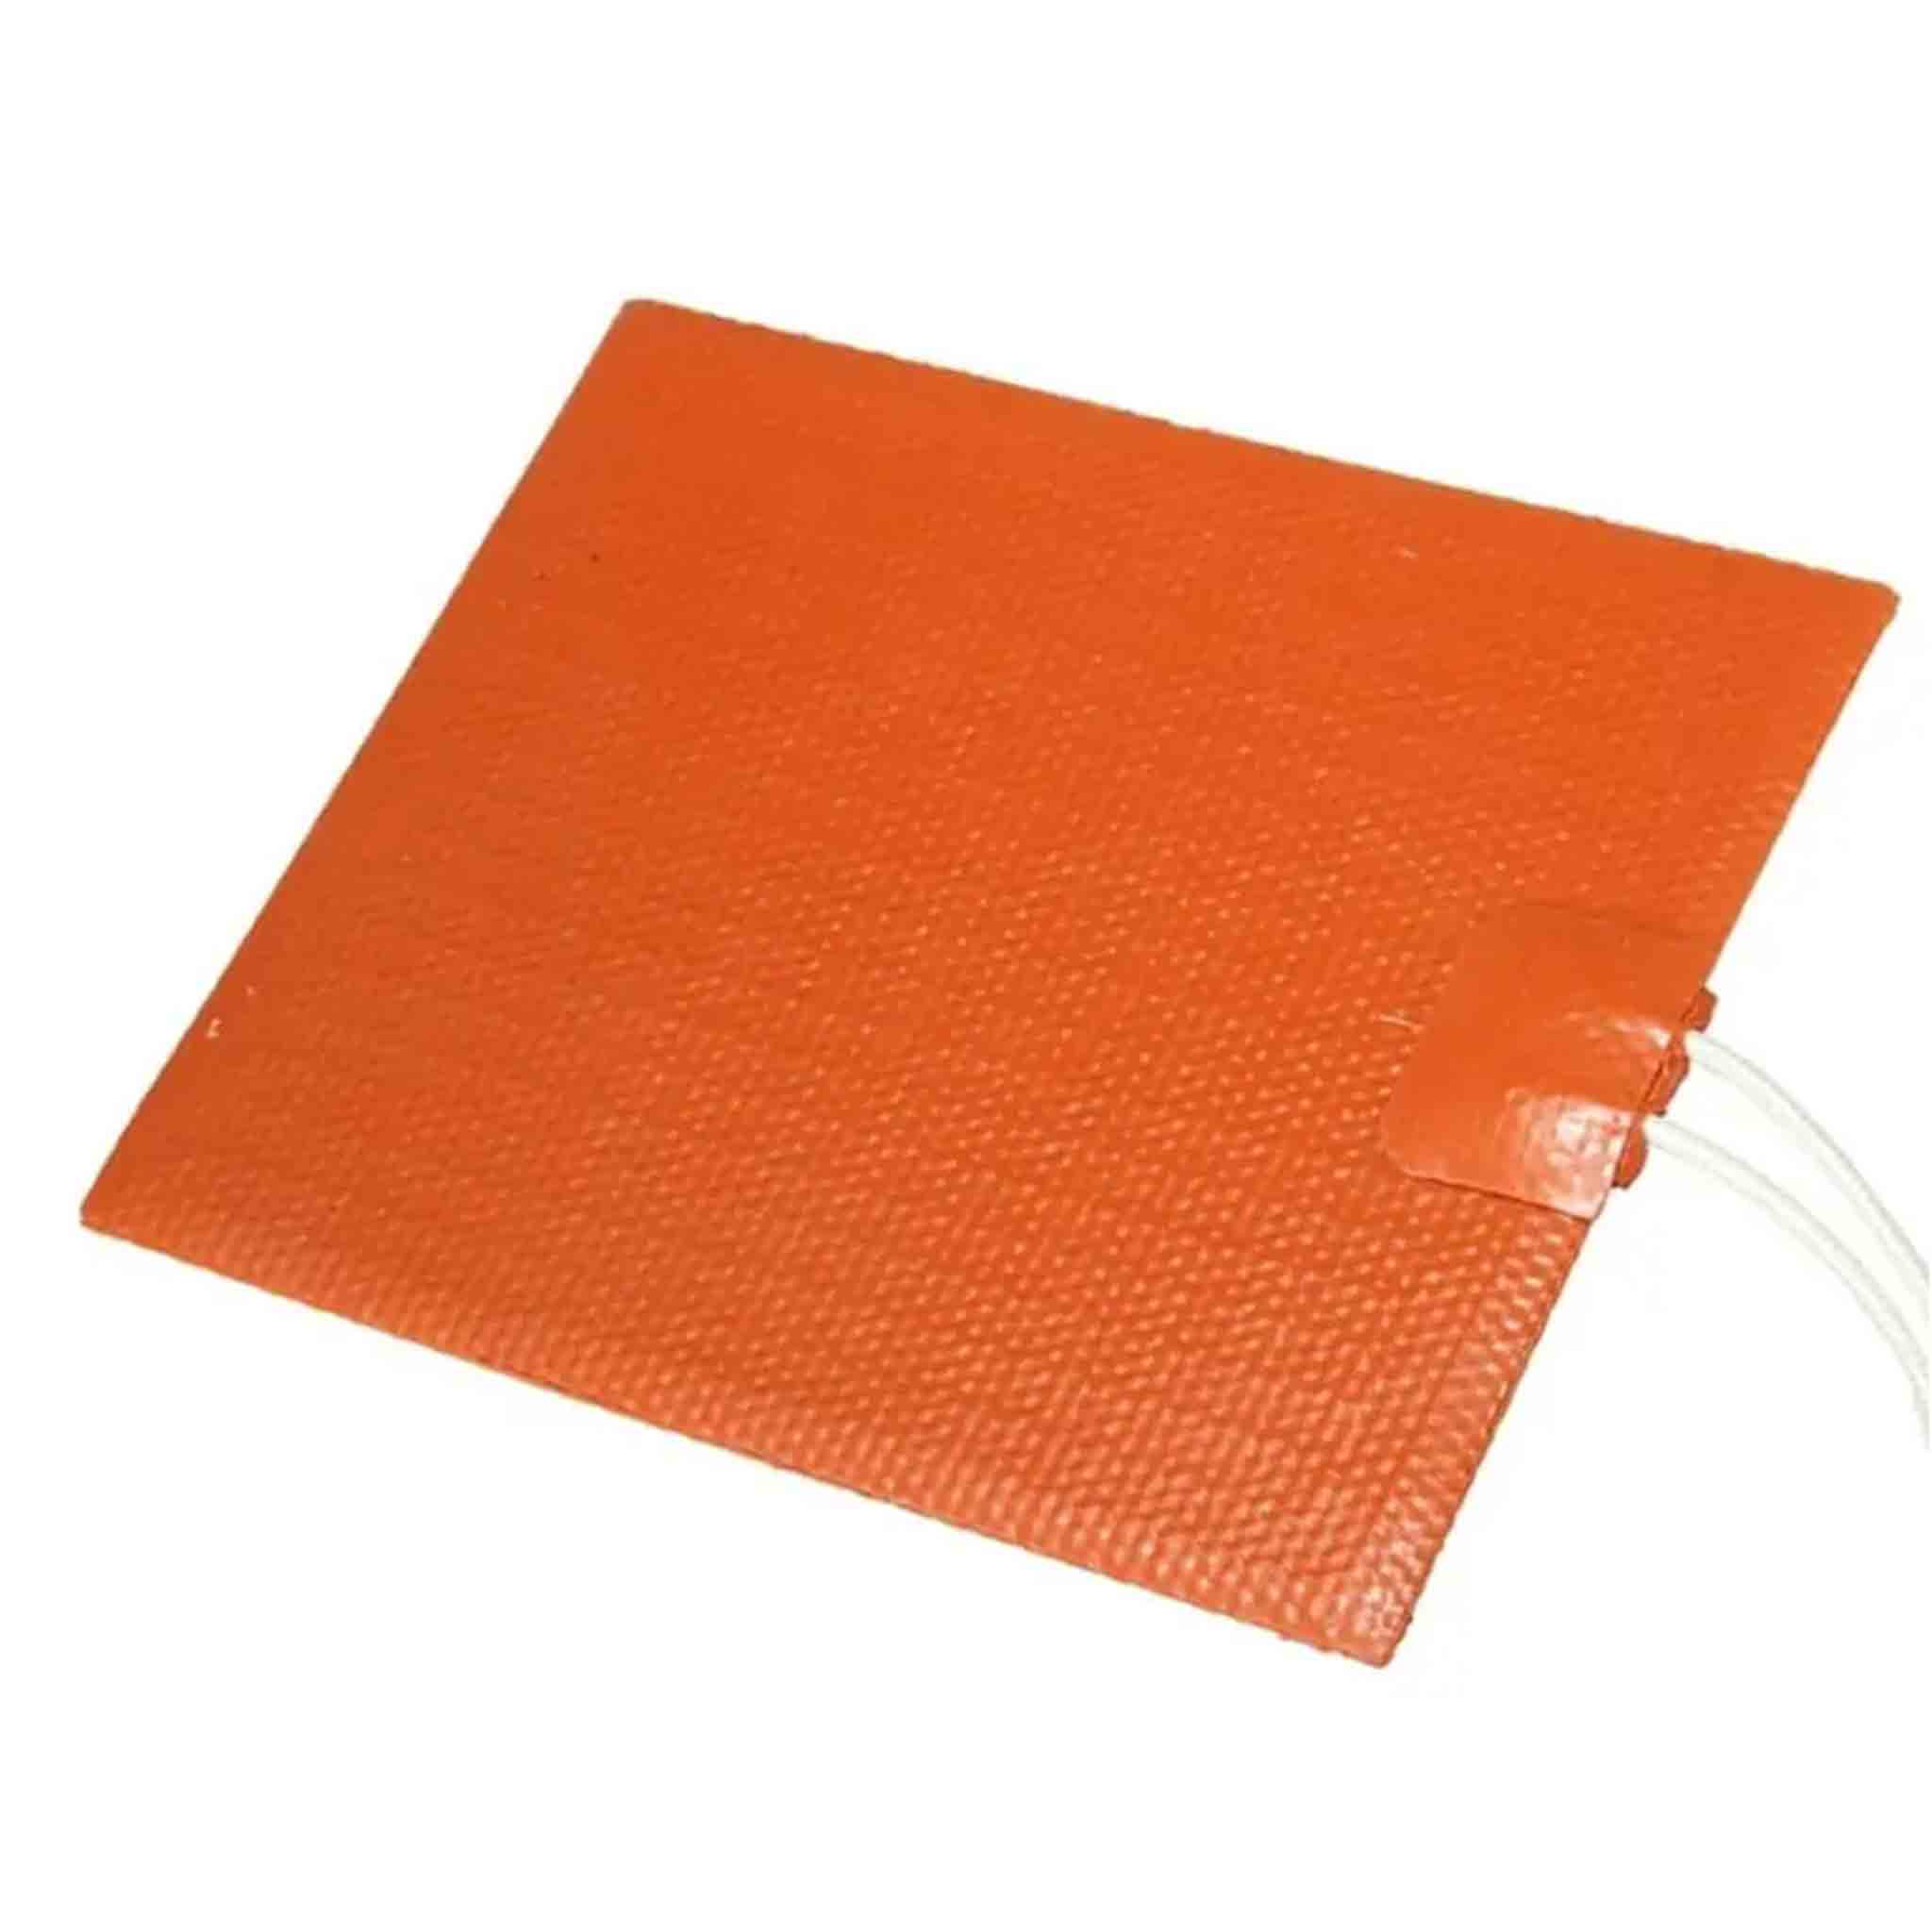 Silicon Heated Pad for Beehives for Keeping your Beehive Warm during Cooler Periods - Health collection by Buzzbee Beekeeping Supplies